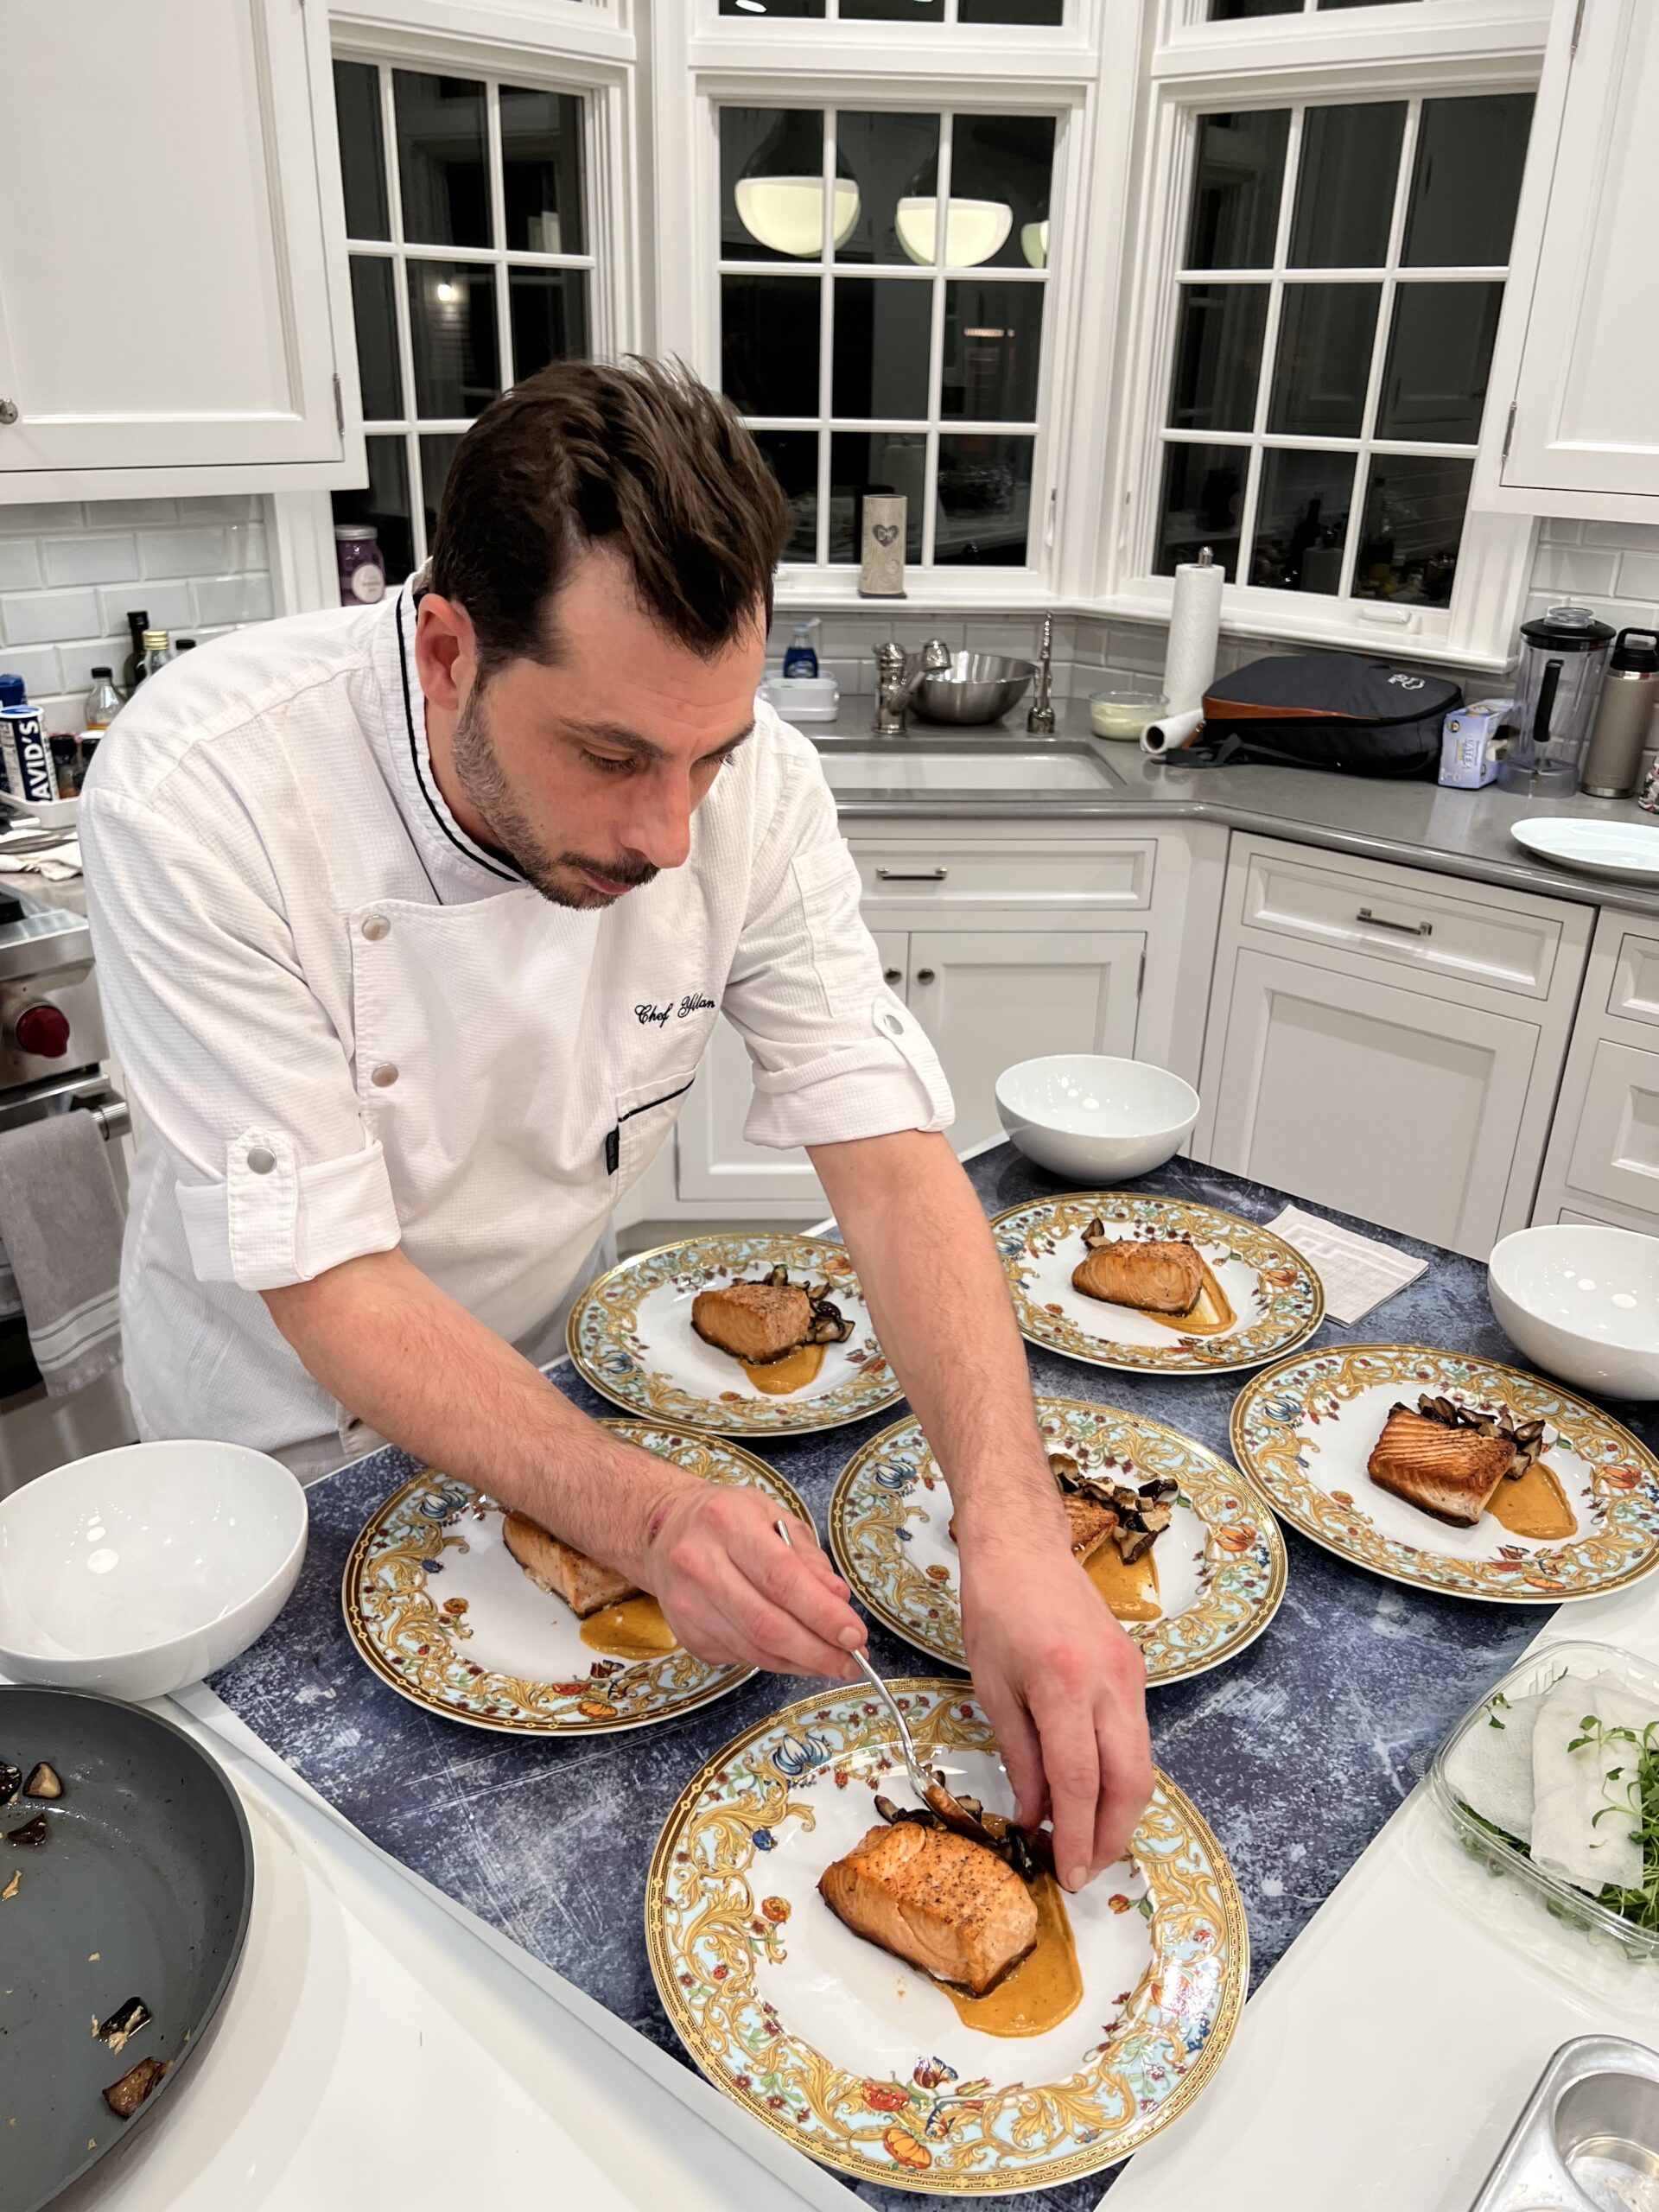 Private Chef Yllan Laloum preparing a private dinner for his clients in New York City.